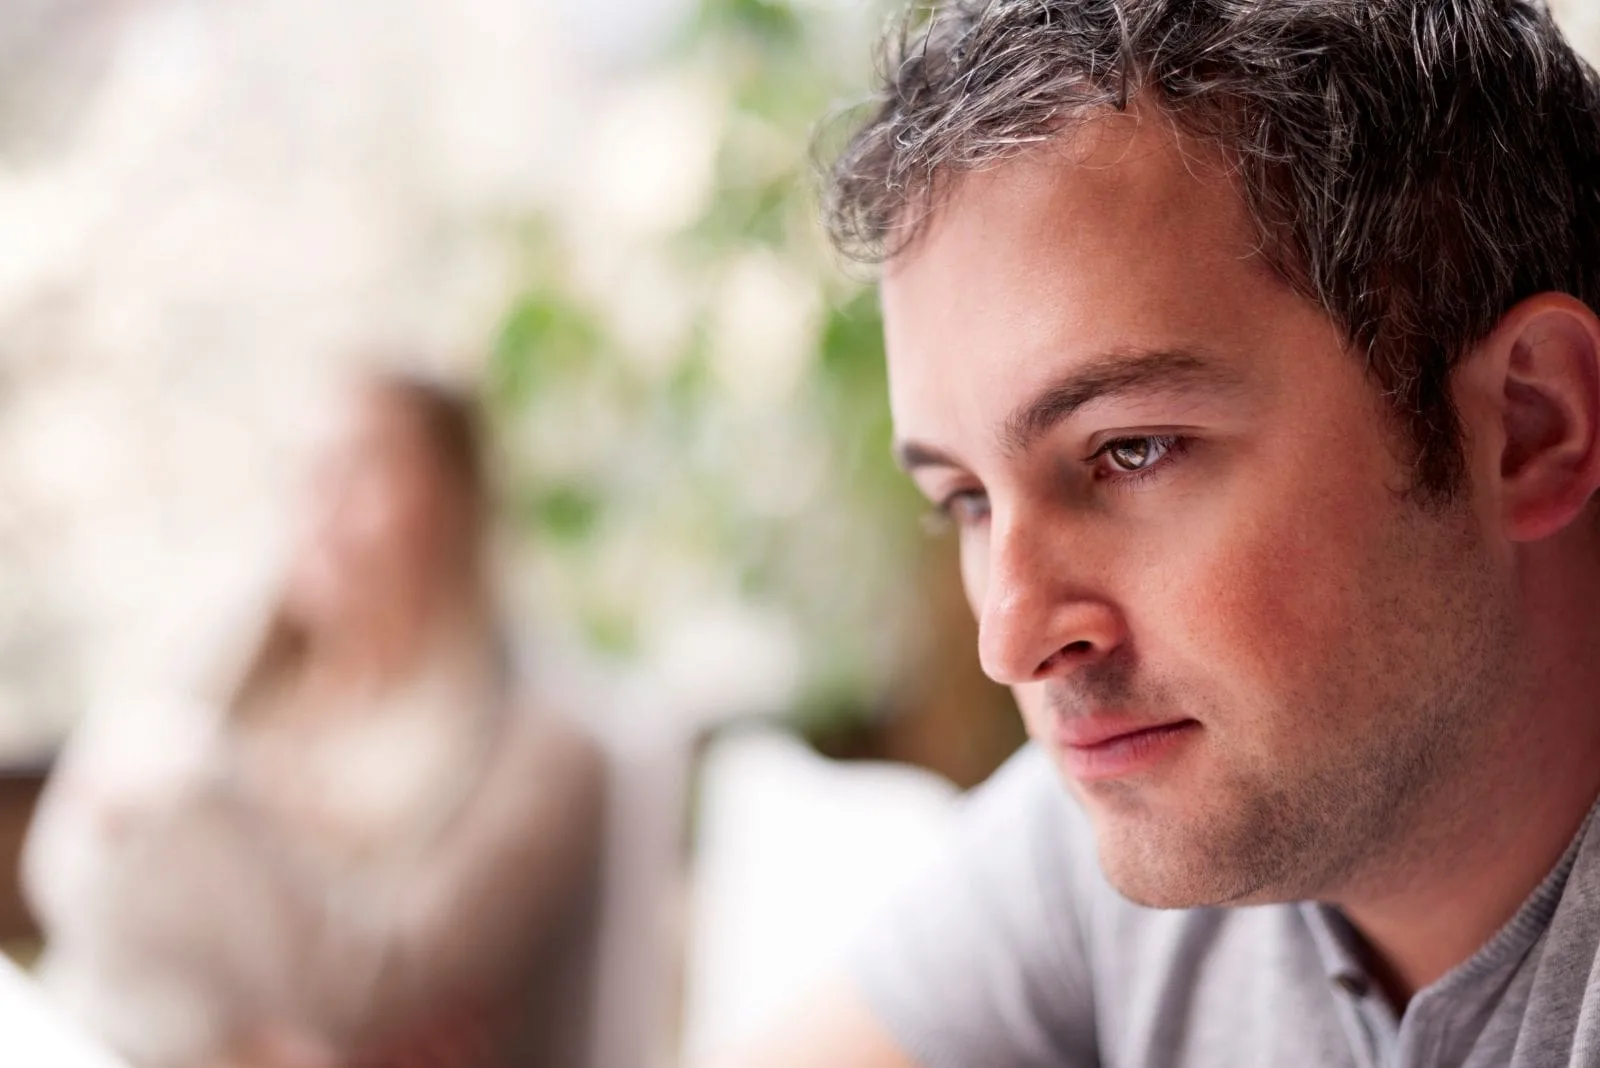 young pensive man focus on his face with blurry image of a woman apart from him